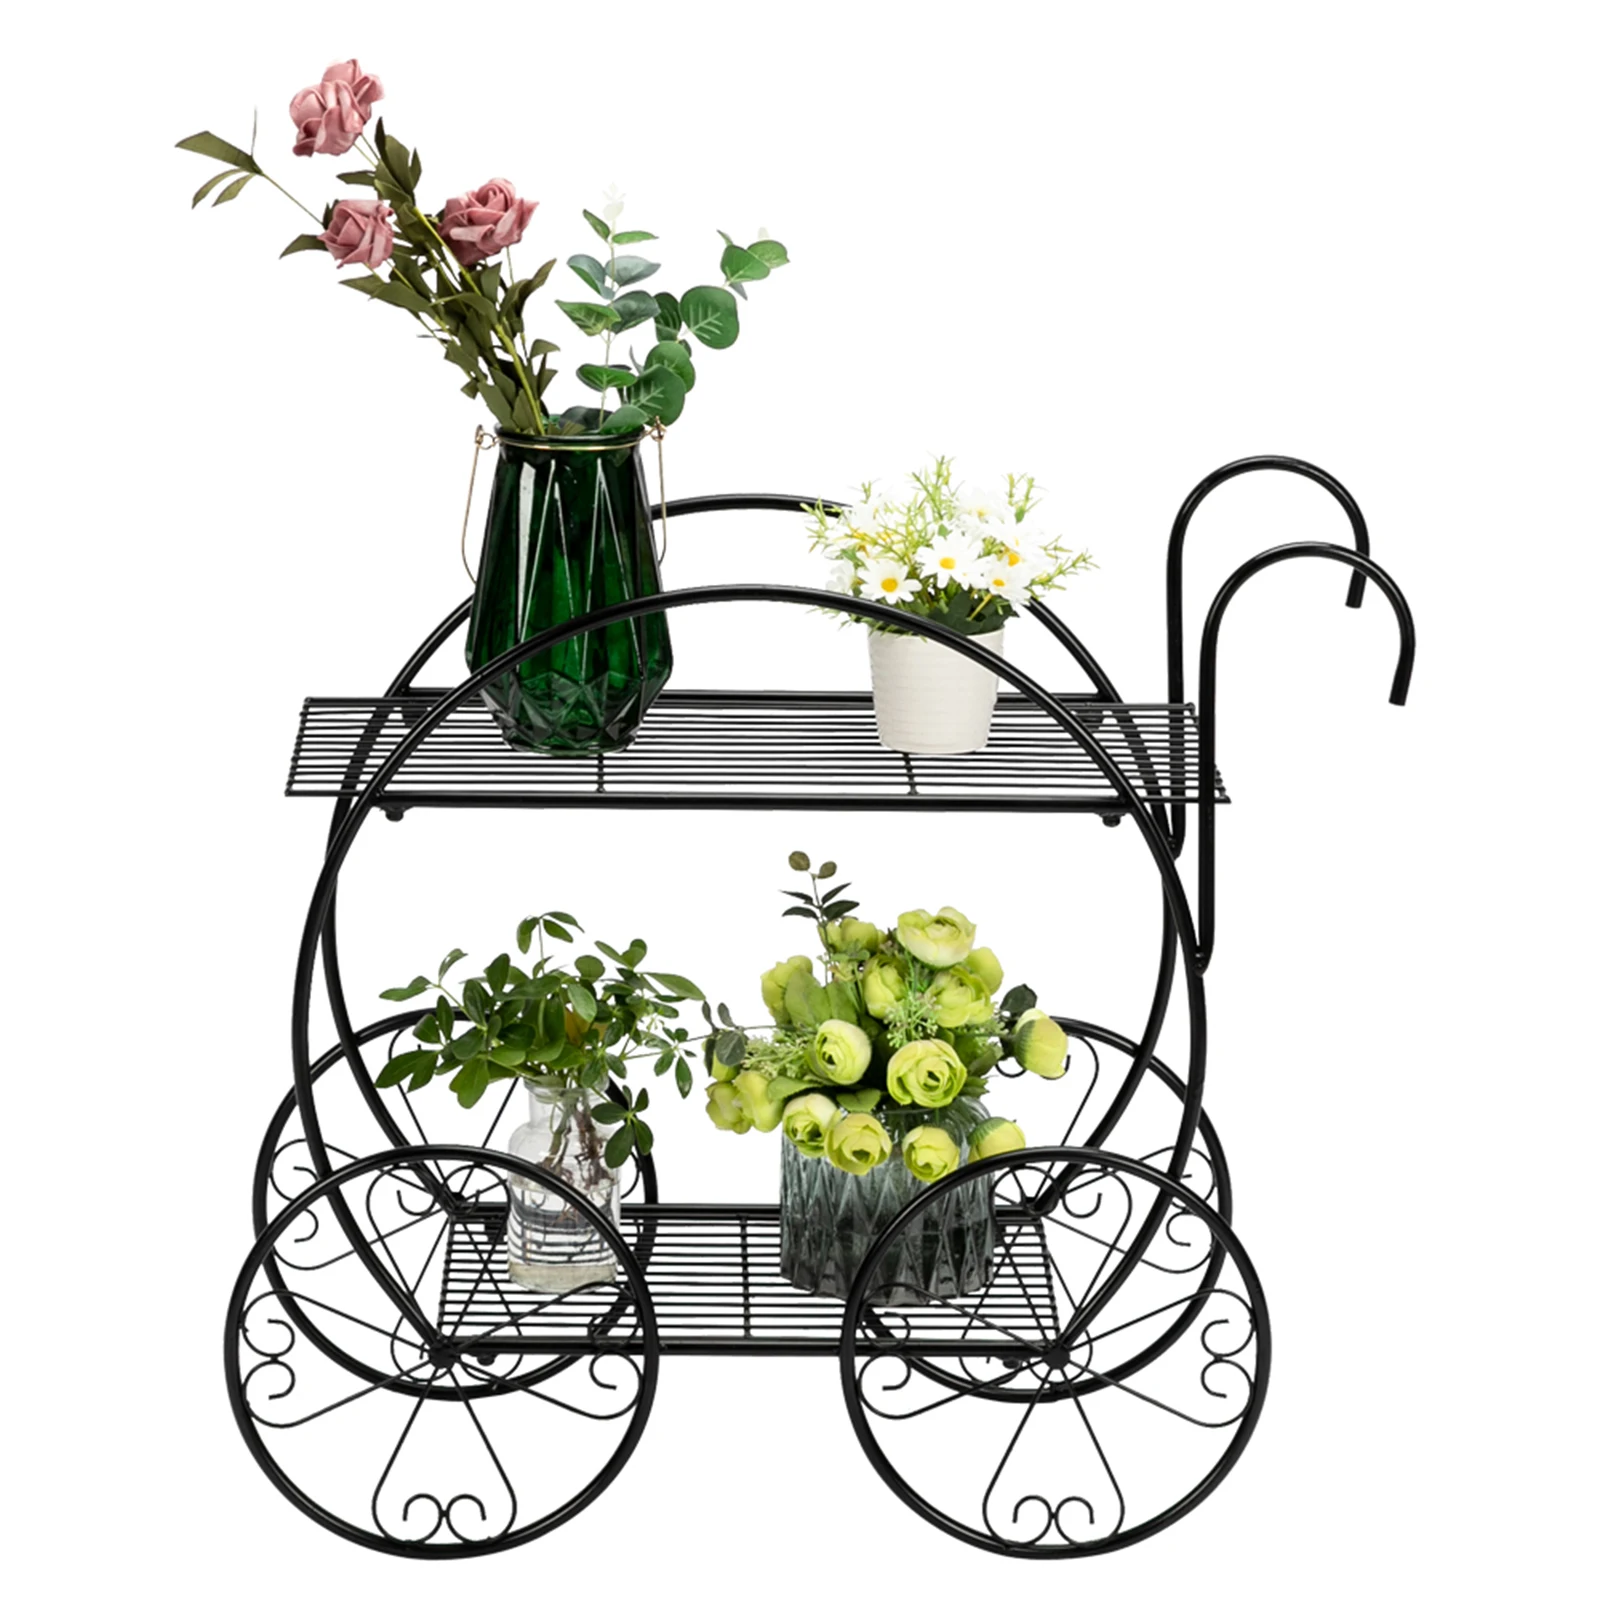 

2 Layer Plant Stand With Handle Cart Flower Planter Shelves Flower Pot Holder Rack Garden Plant Display Cart for Home Decors